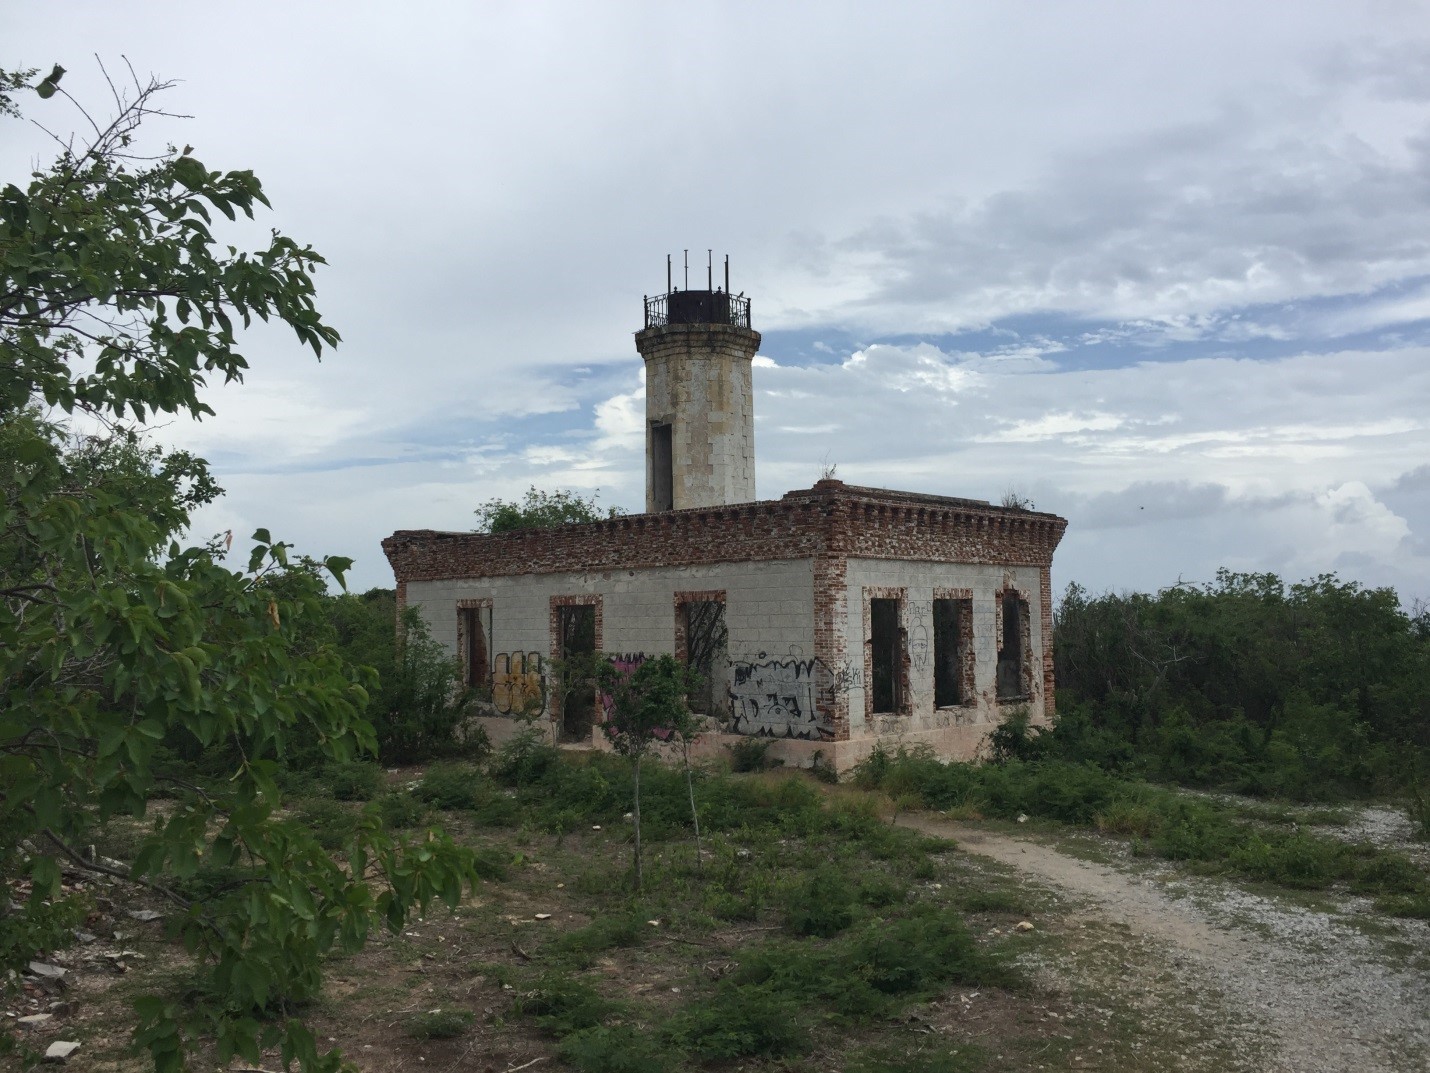 9.	View of Guanica Lighthouse from the northwest in 2016 showing damage and vandalism. (Photo taken by author)